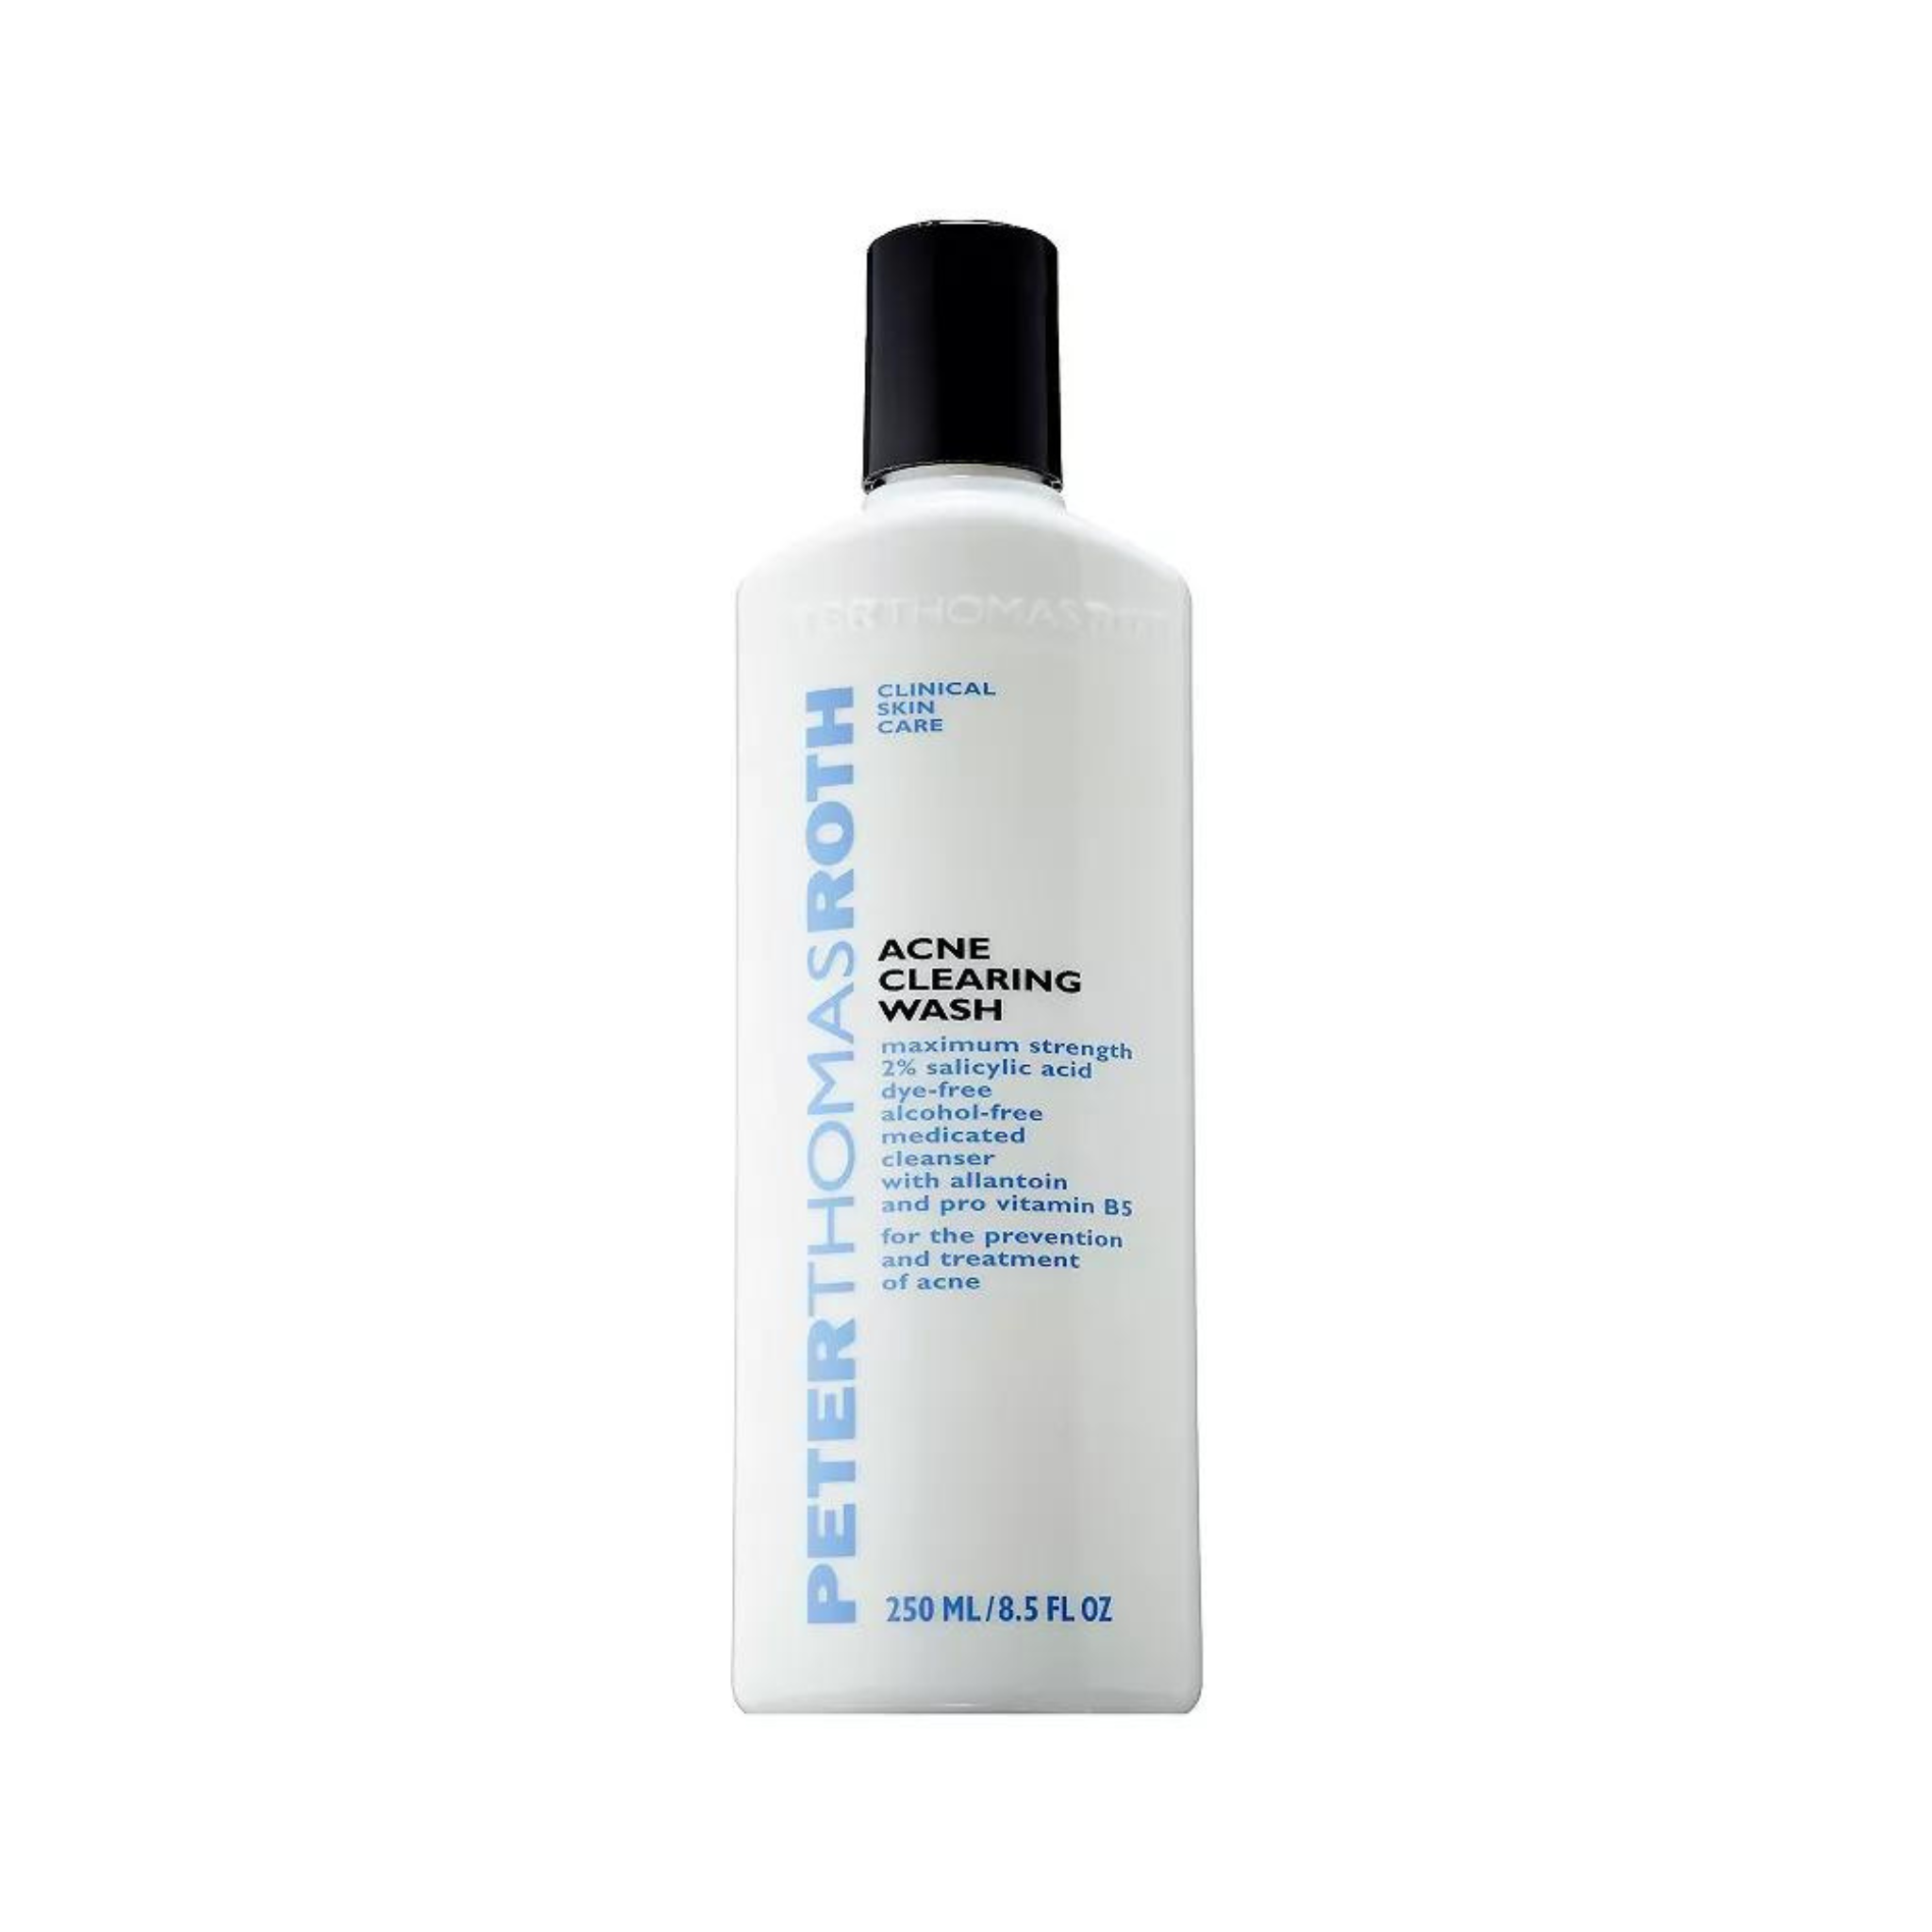 Peter Thomas Roth Salicylic Acid Acne Clearing Face Wash